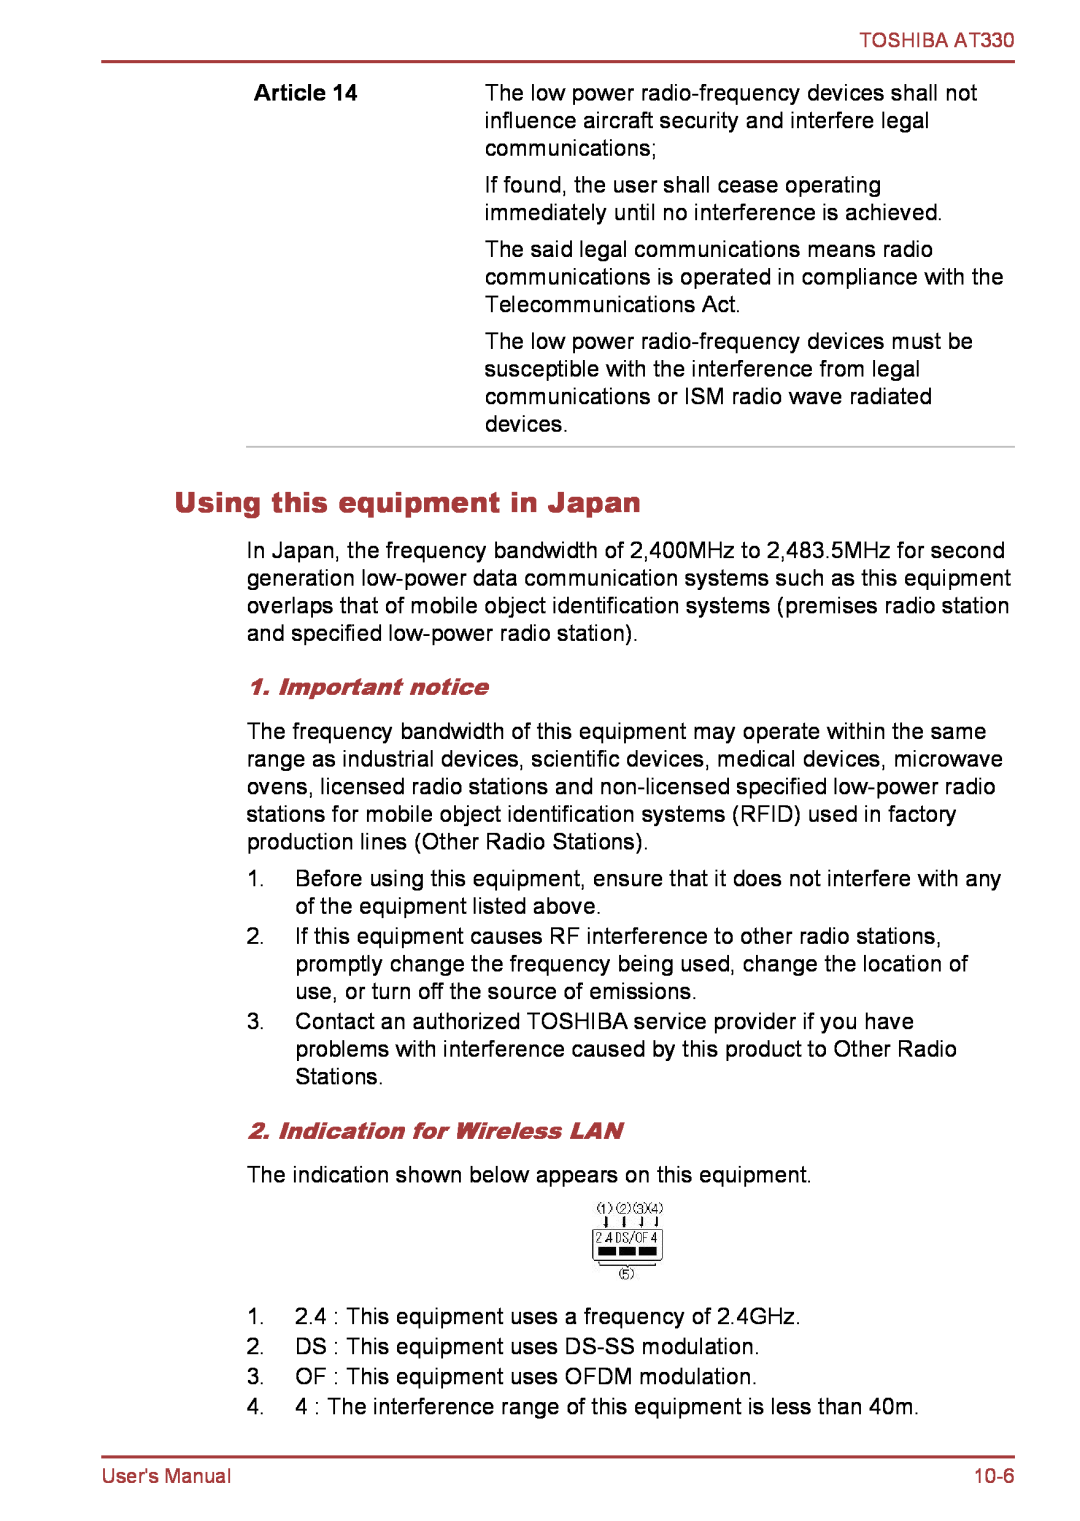 Toshiba at330 user manual Using this equipment in Japan, Important notice, Indication for Wireless LAN, Article 